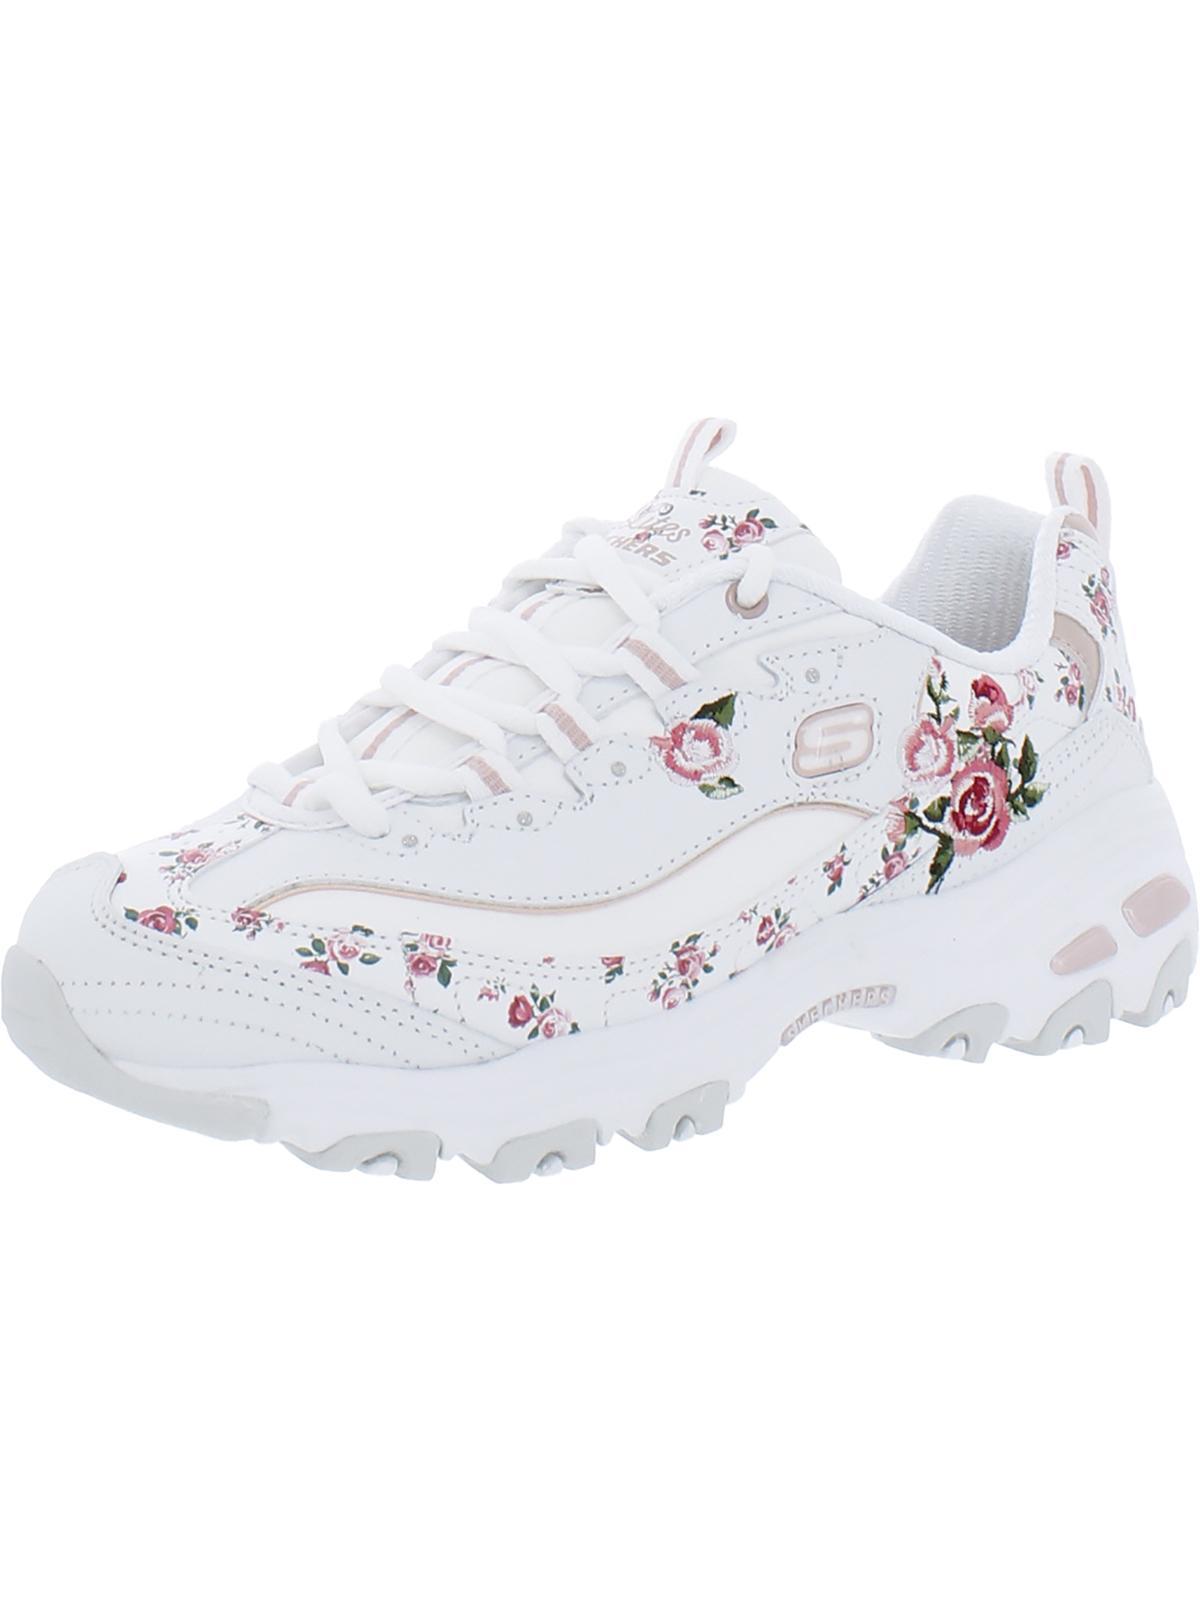 Skechers Blooming Path Embroidered Casual And Fashion Sneakers in White | Lyst